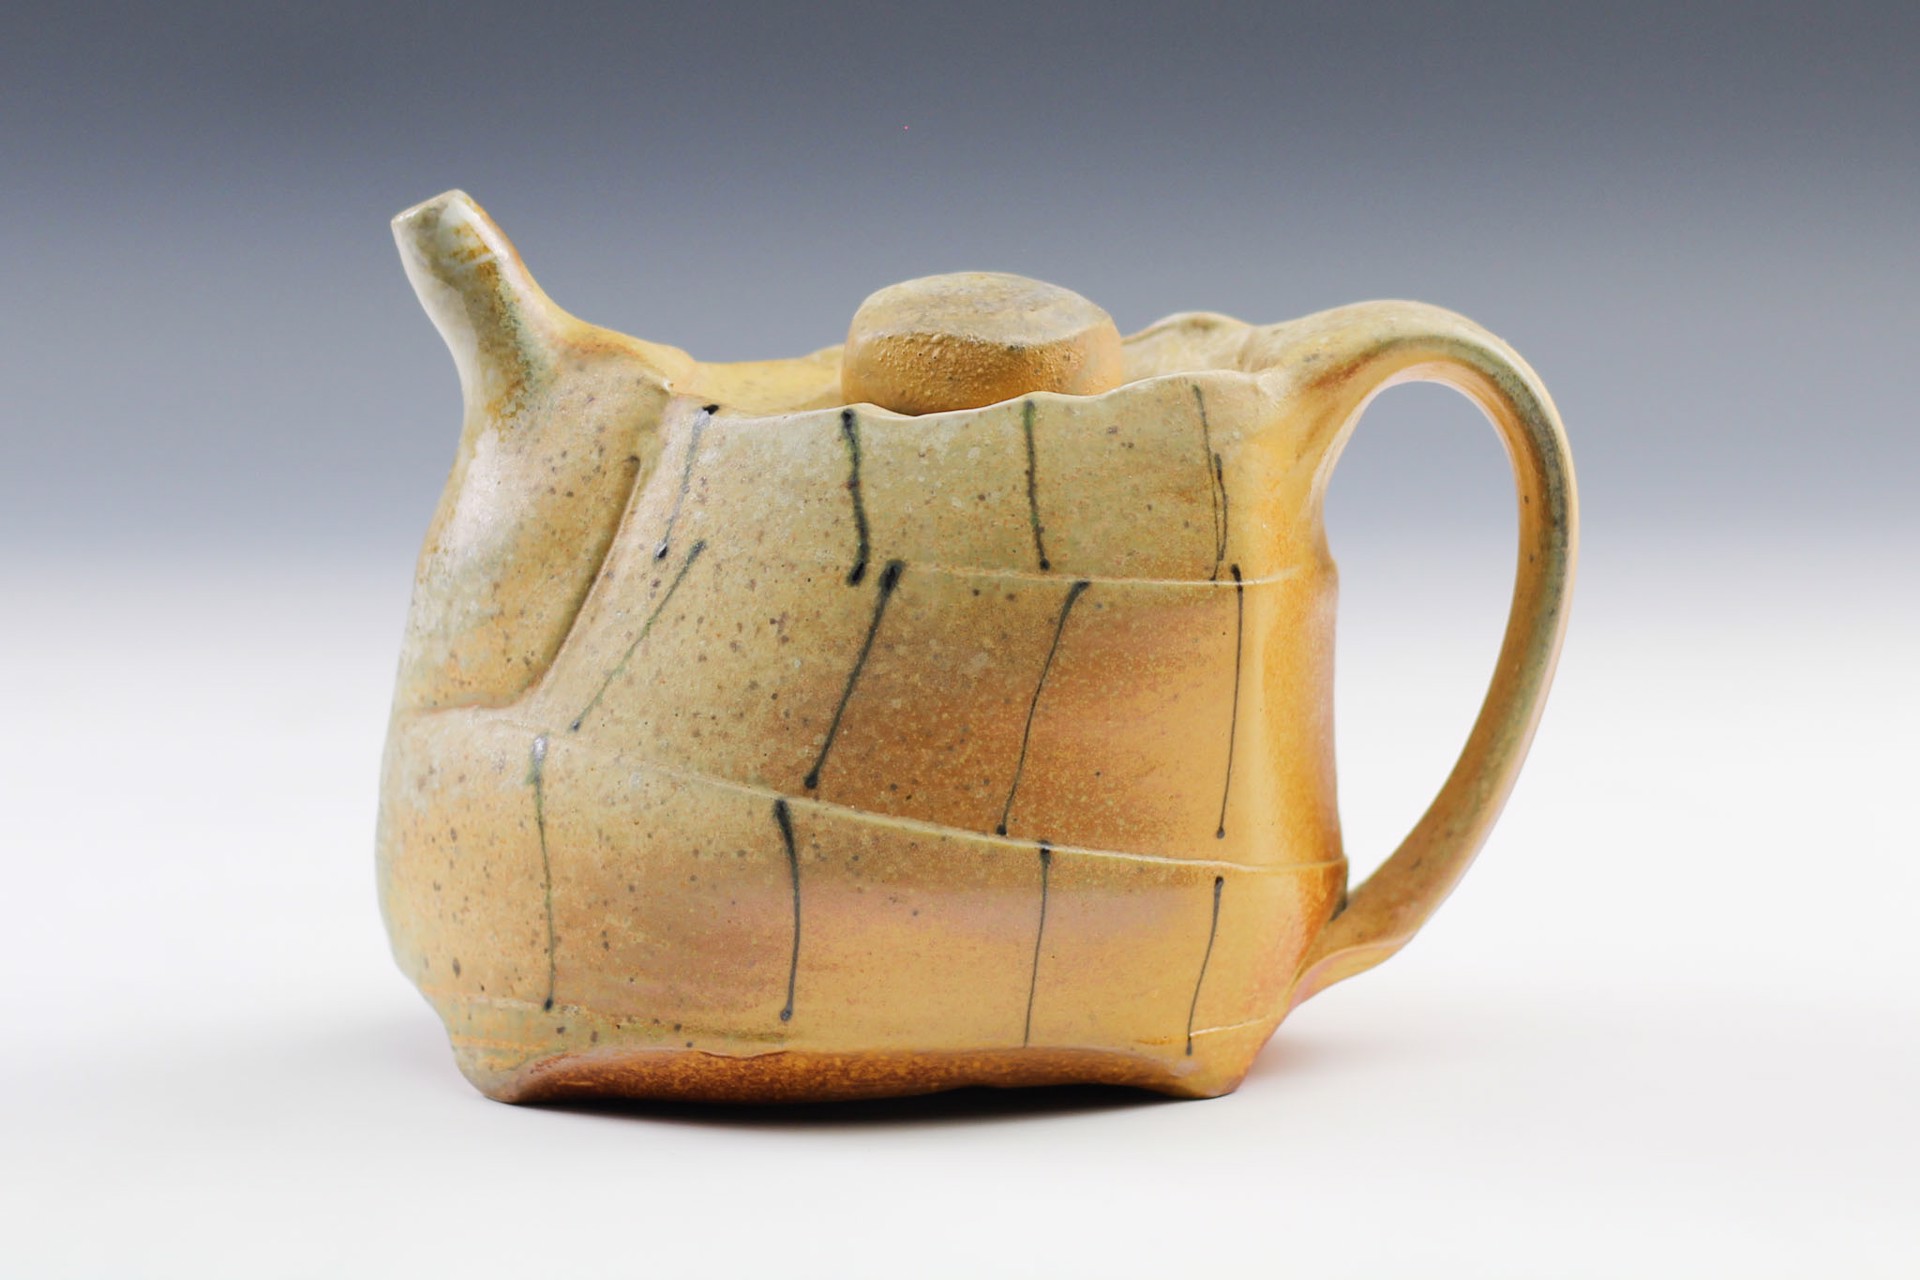 Teapot by Delores Fortuna